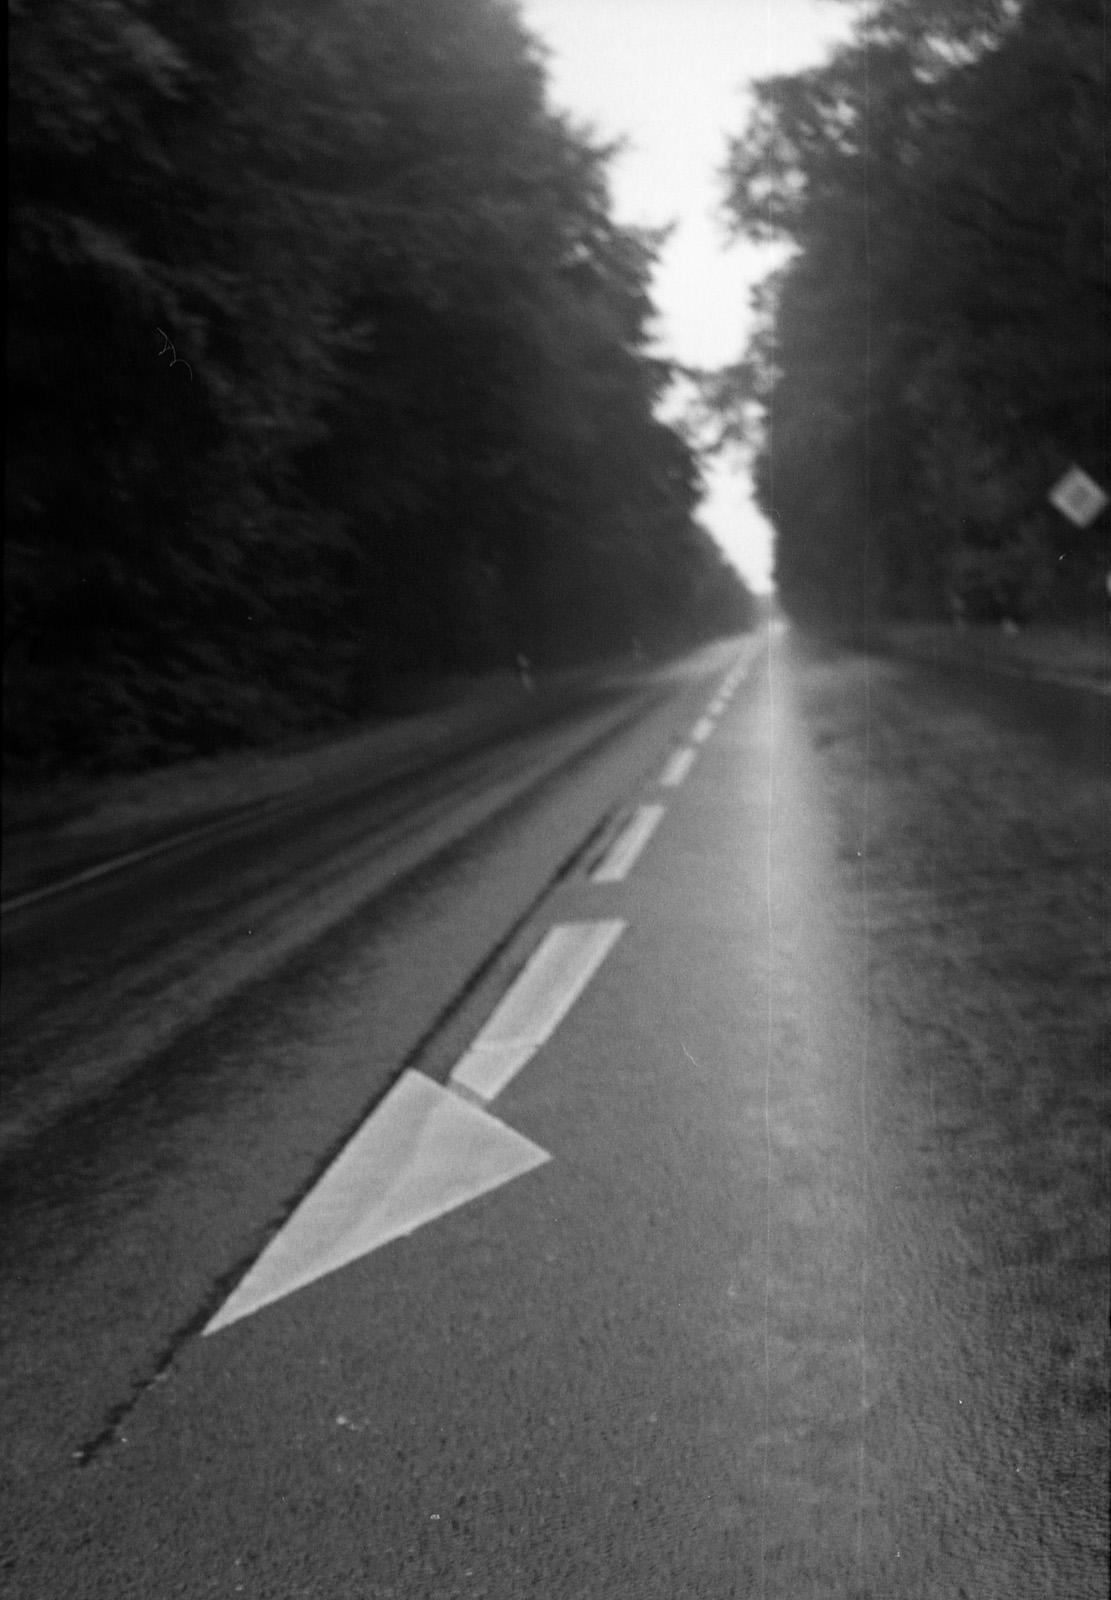 a white arrow on a road with trees behind it